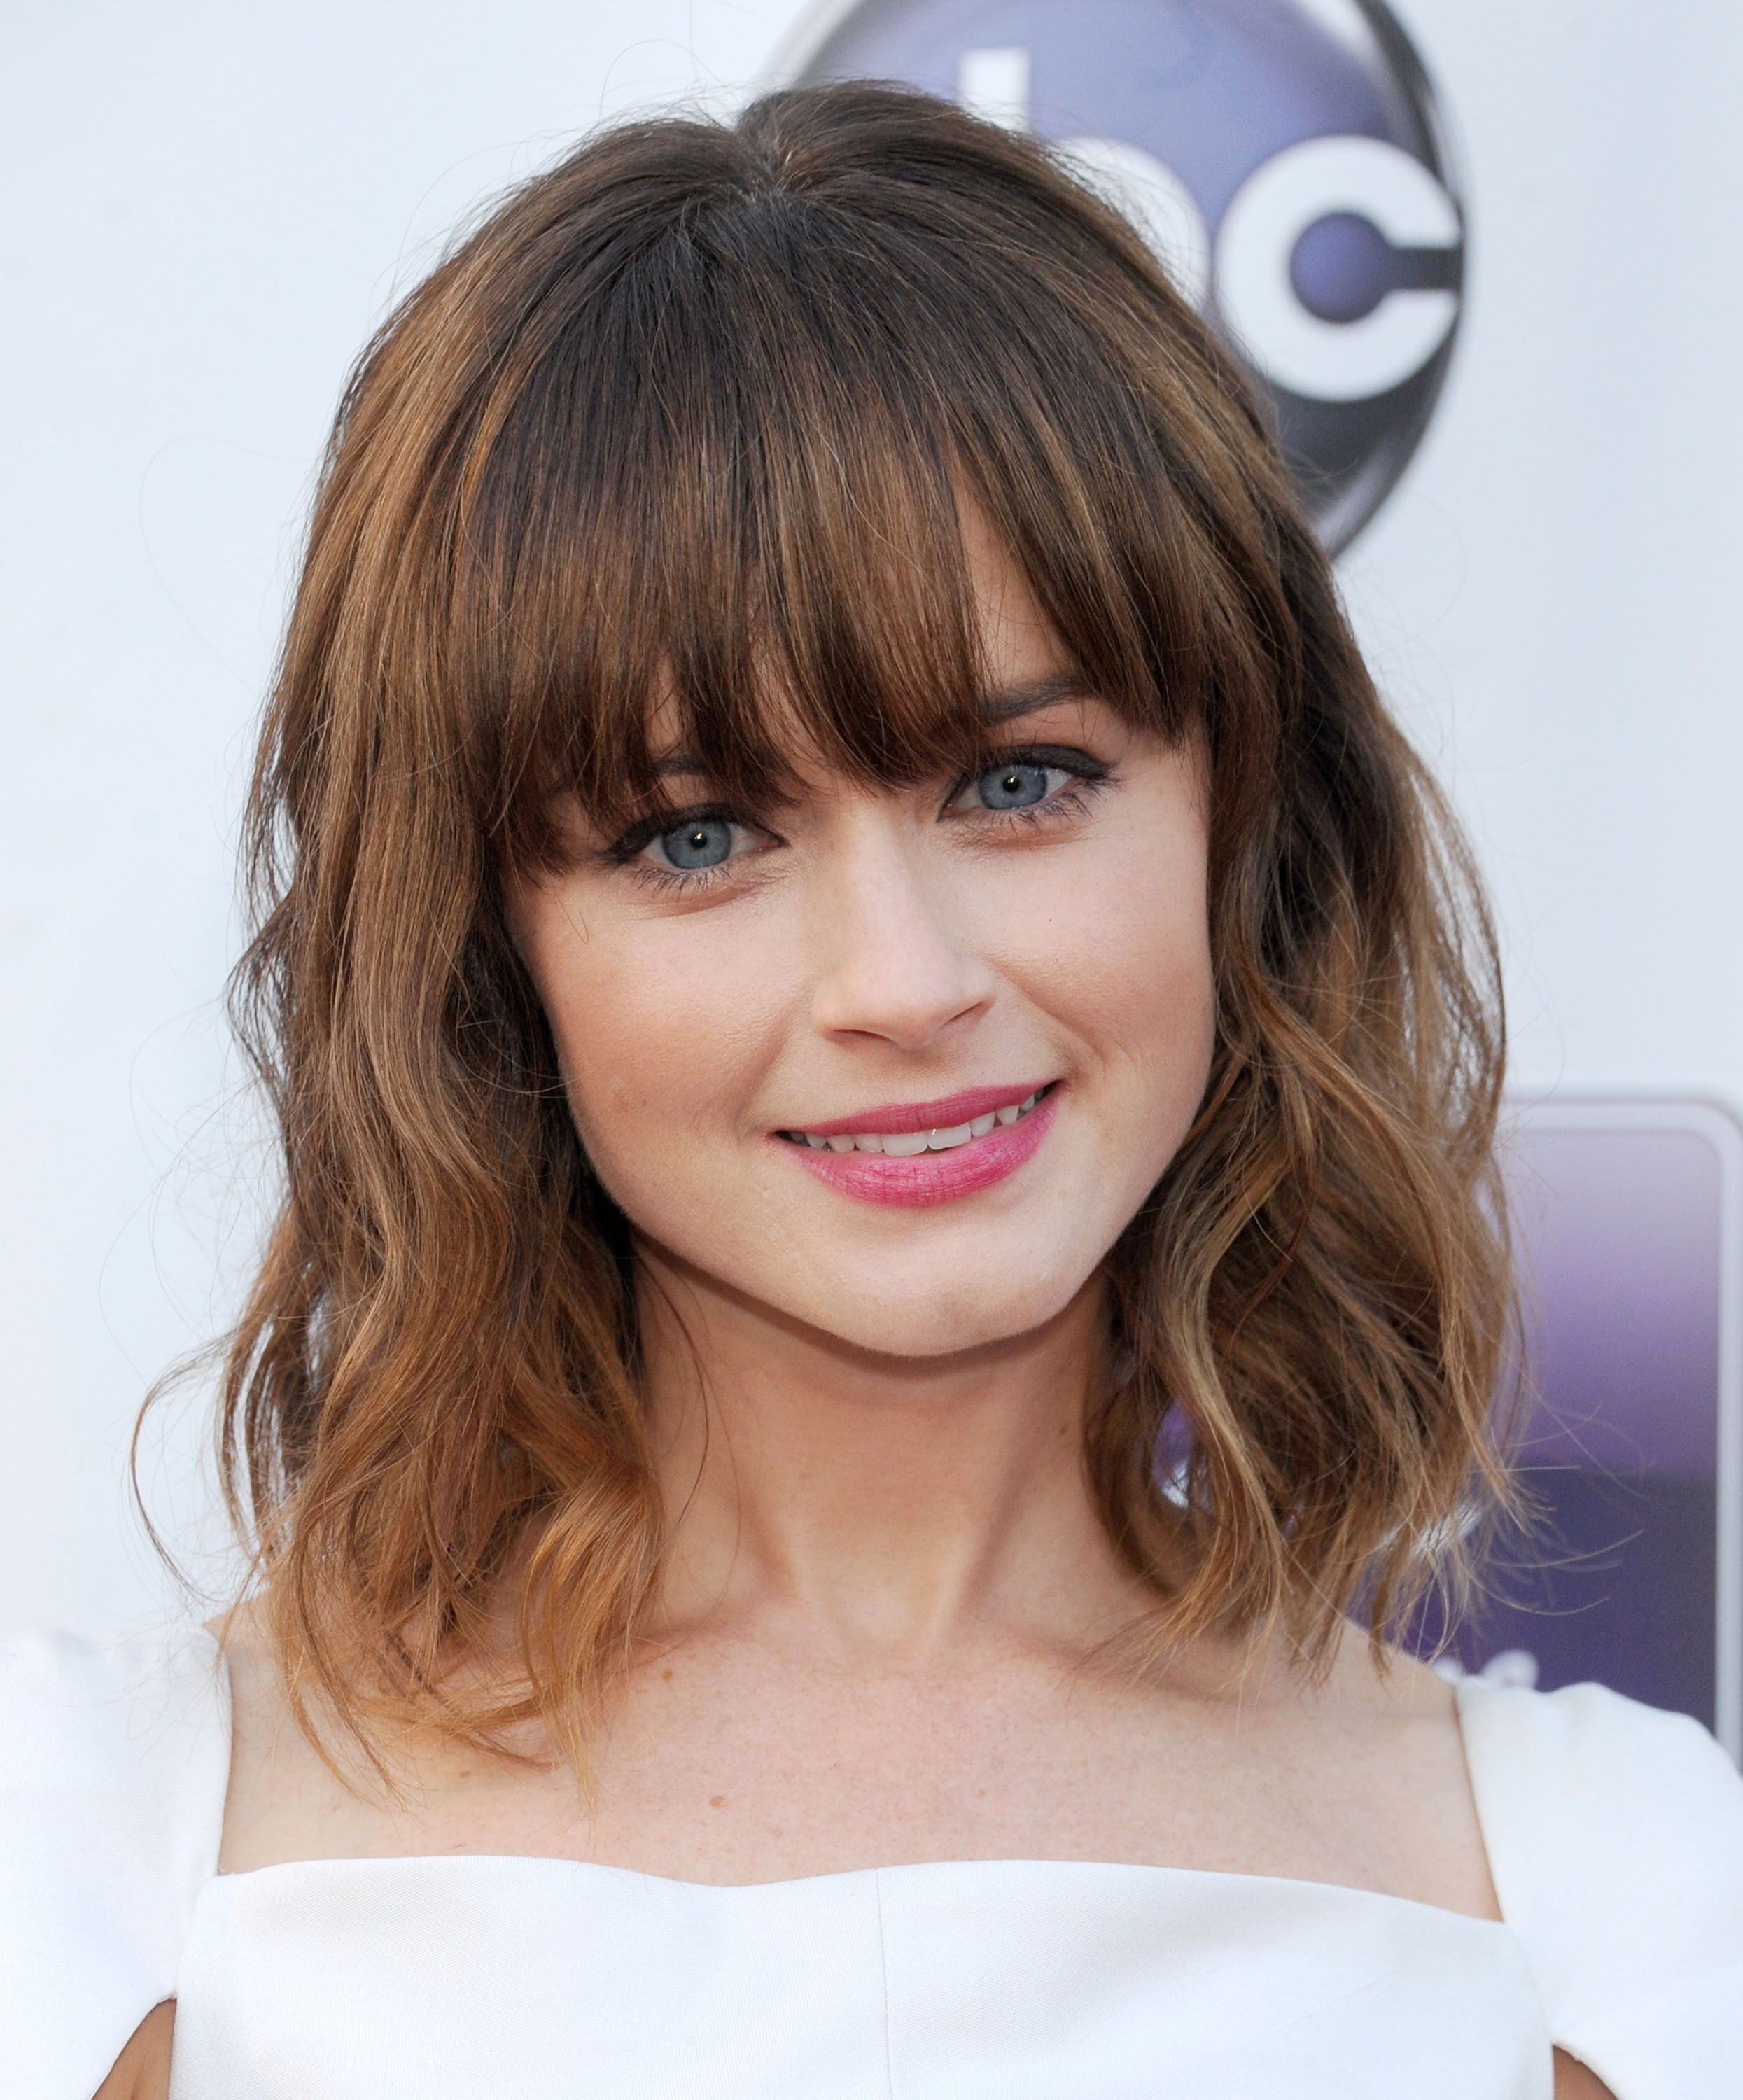 40 Best Hairstyles With Bangs - Celebrity Haircuts With Bangs